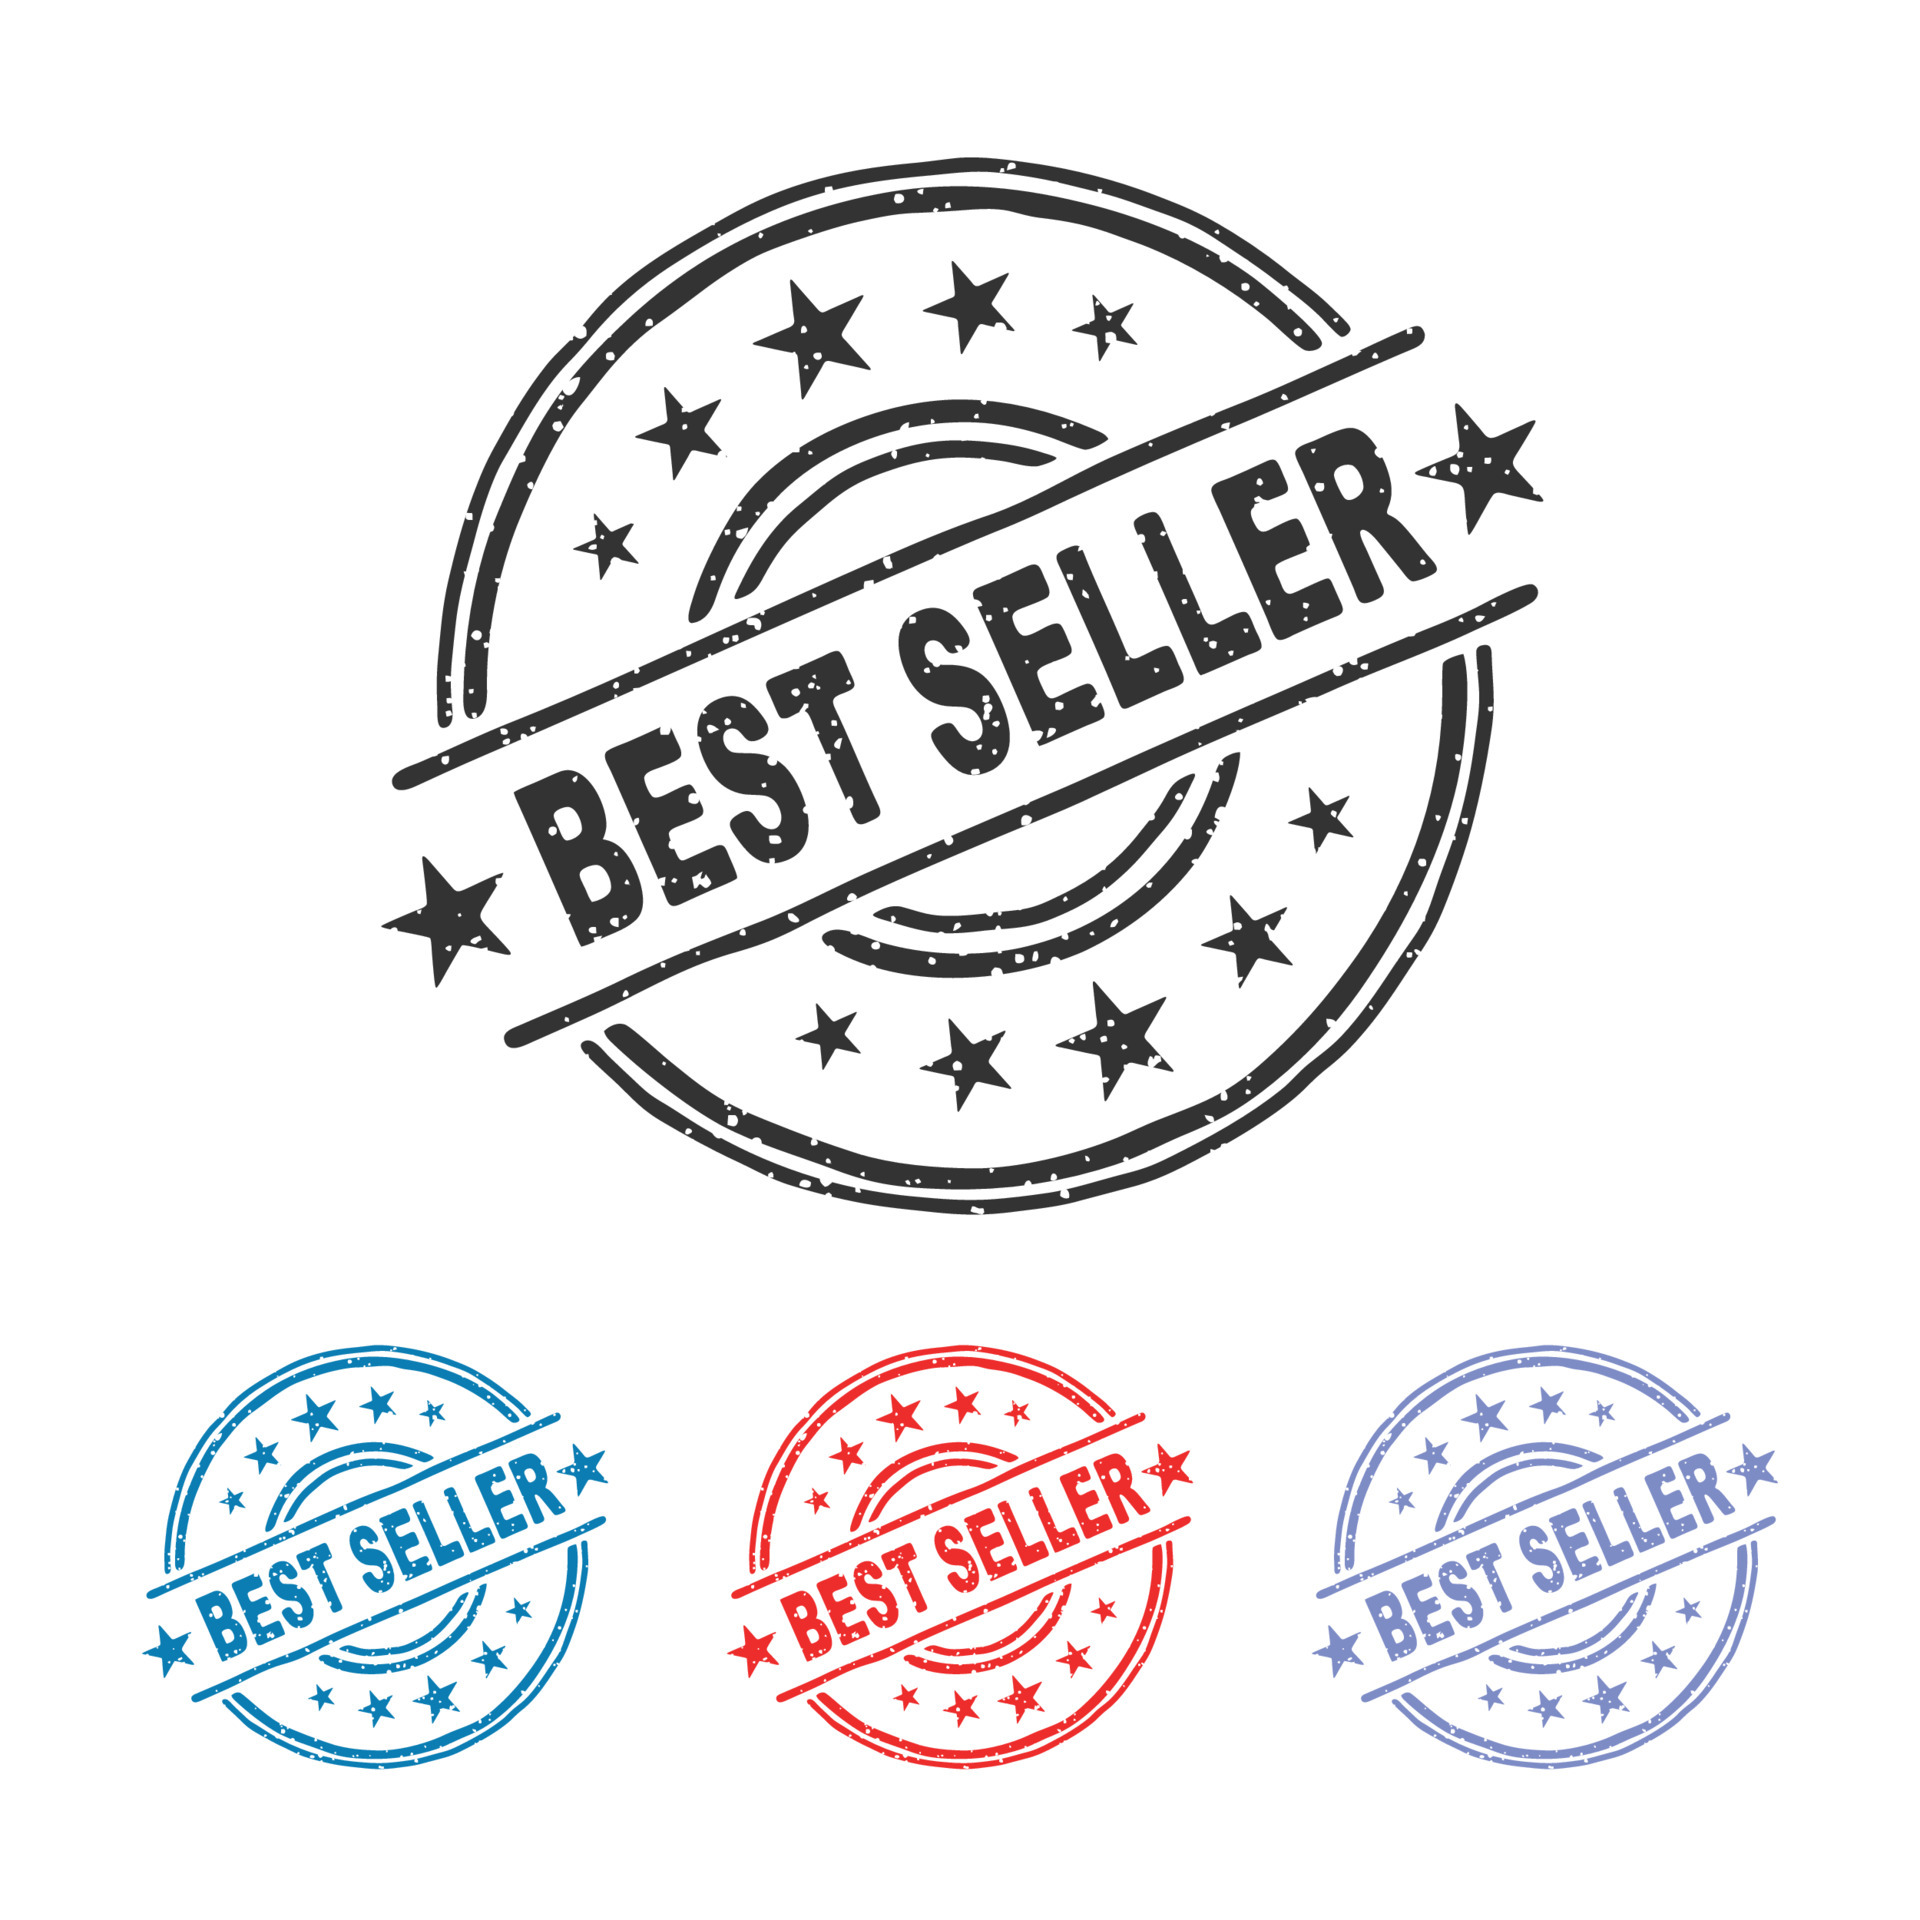 Best Selling Stamp Rubber Style Set Stock Vector (Royalty Free) 1982451824